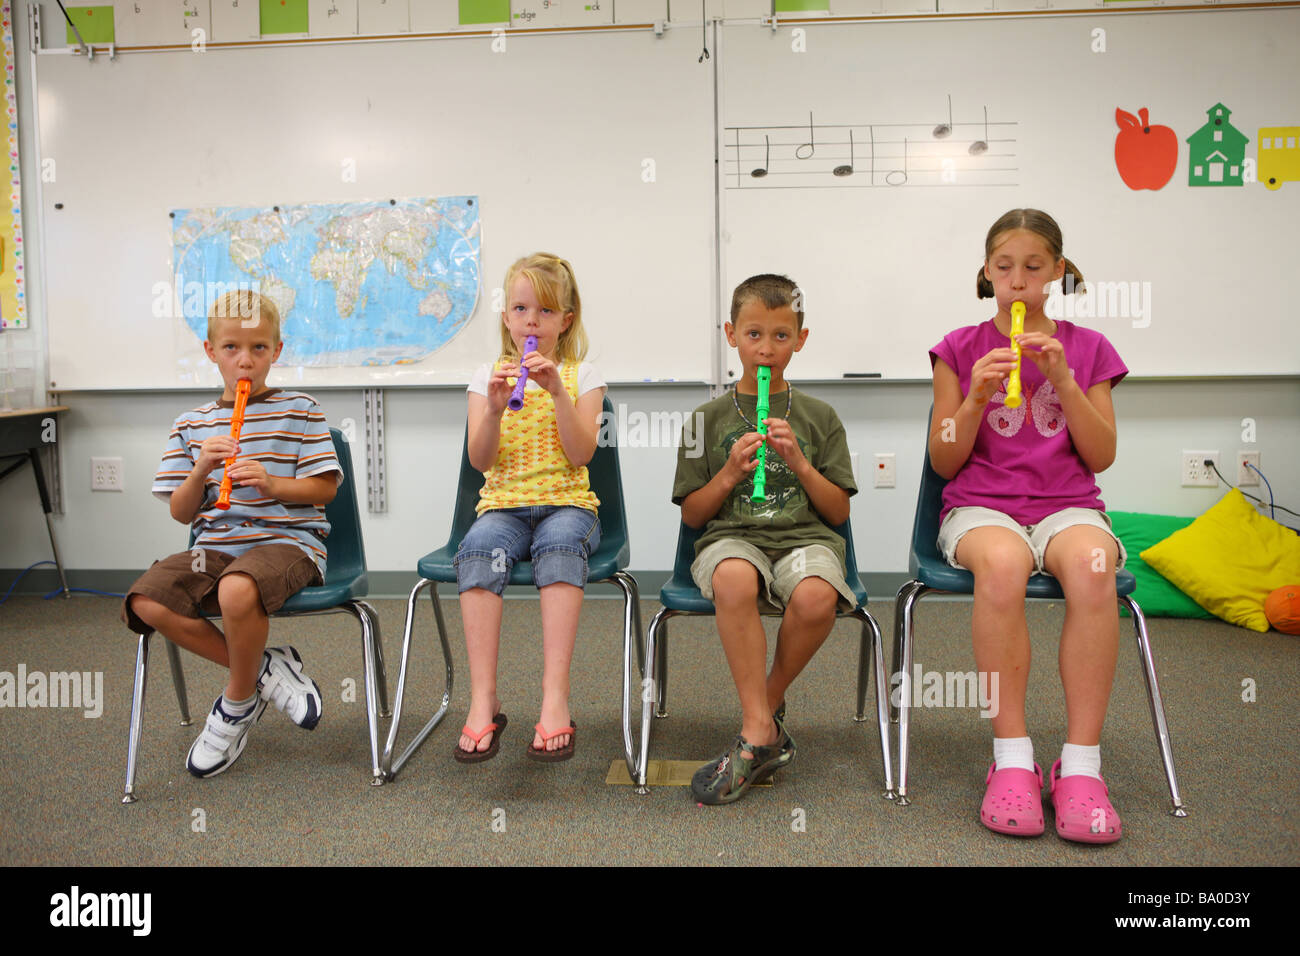 Four school children playing insturments in classroom Stock Photo